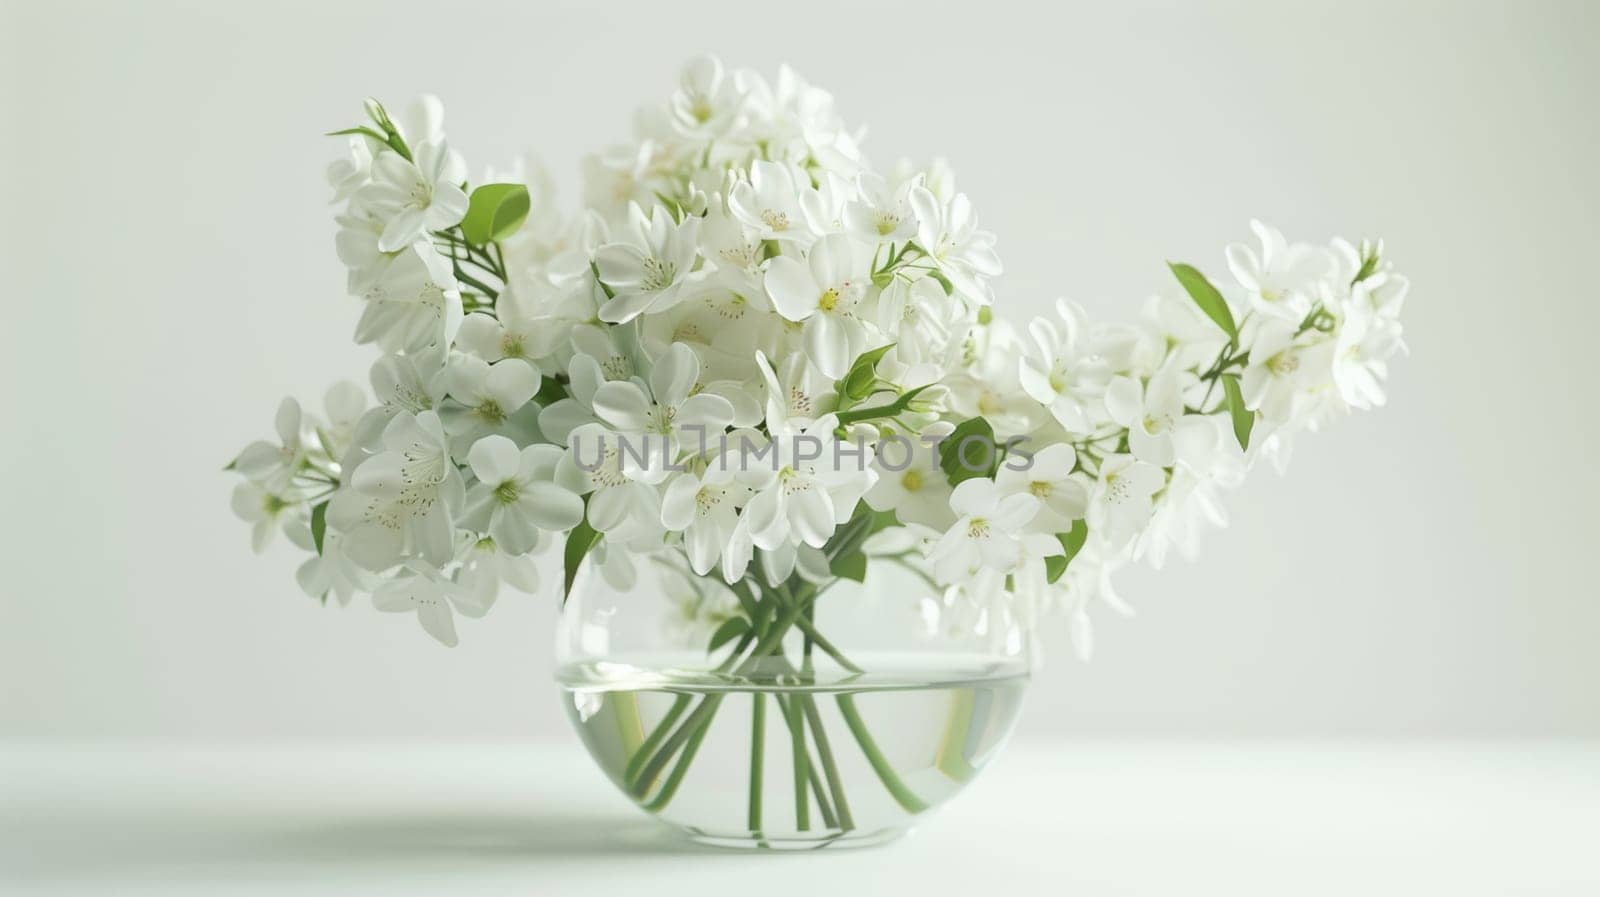 A vase of a clear glass with white flowers in it